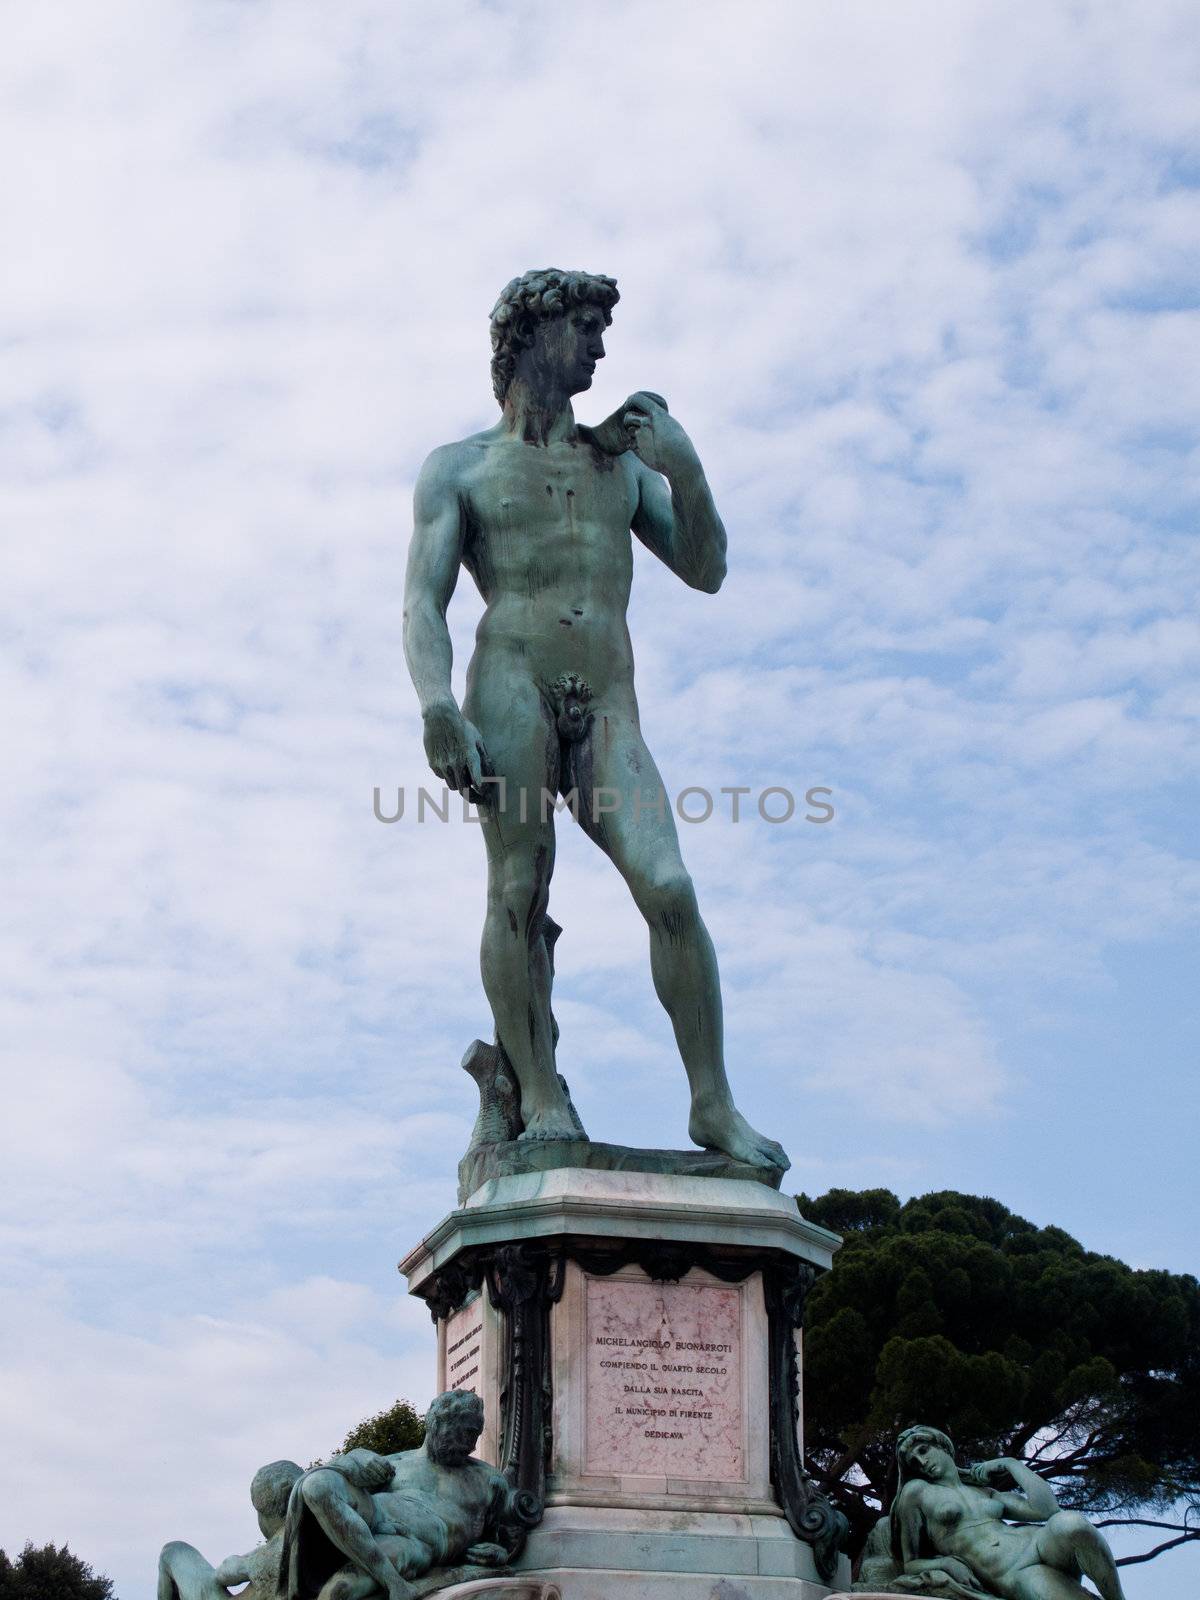 Famous statue of David by Michelangiolo Buonarroti in Florence